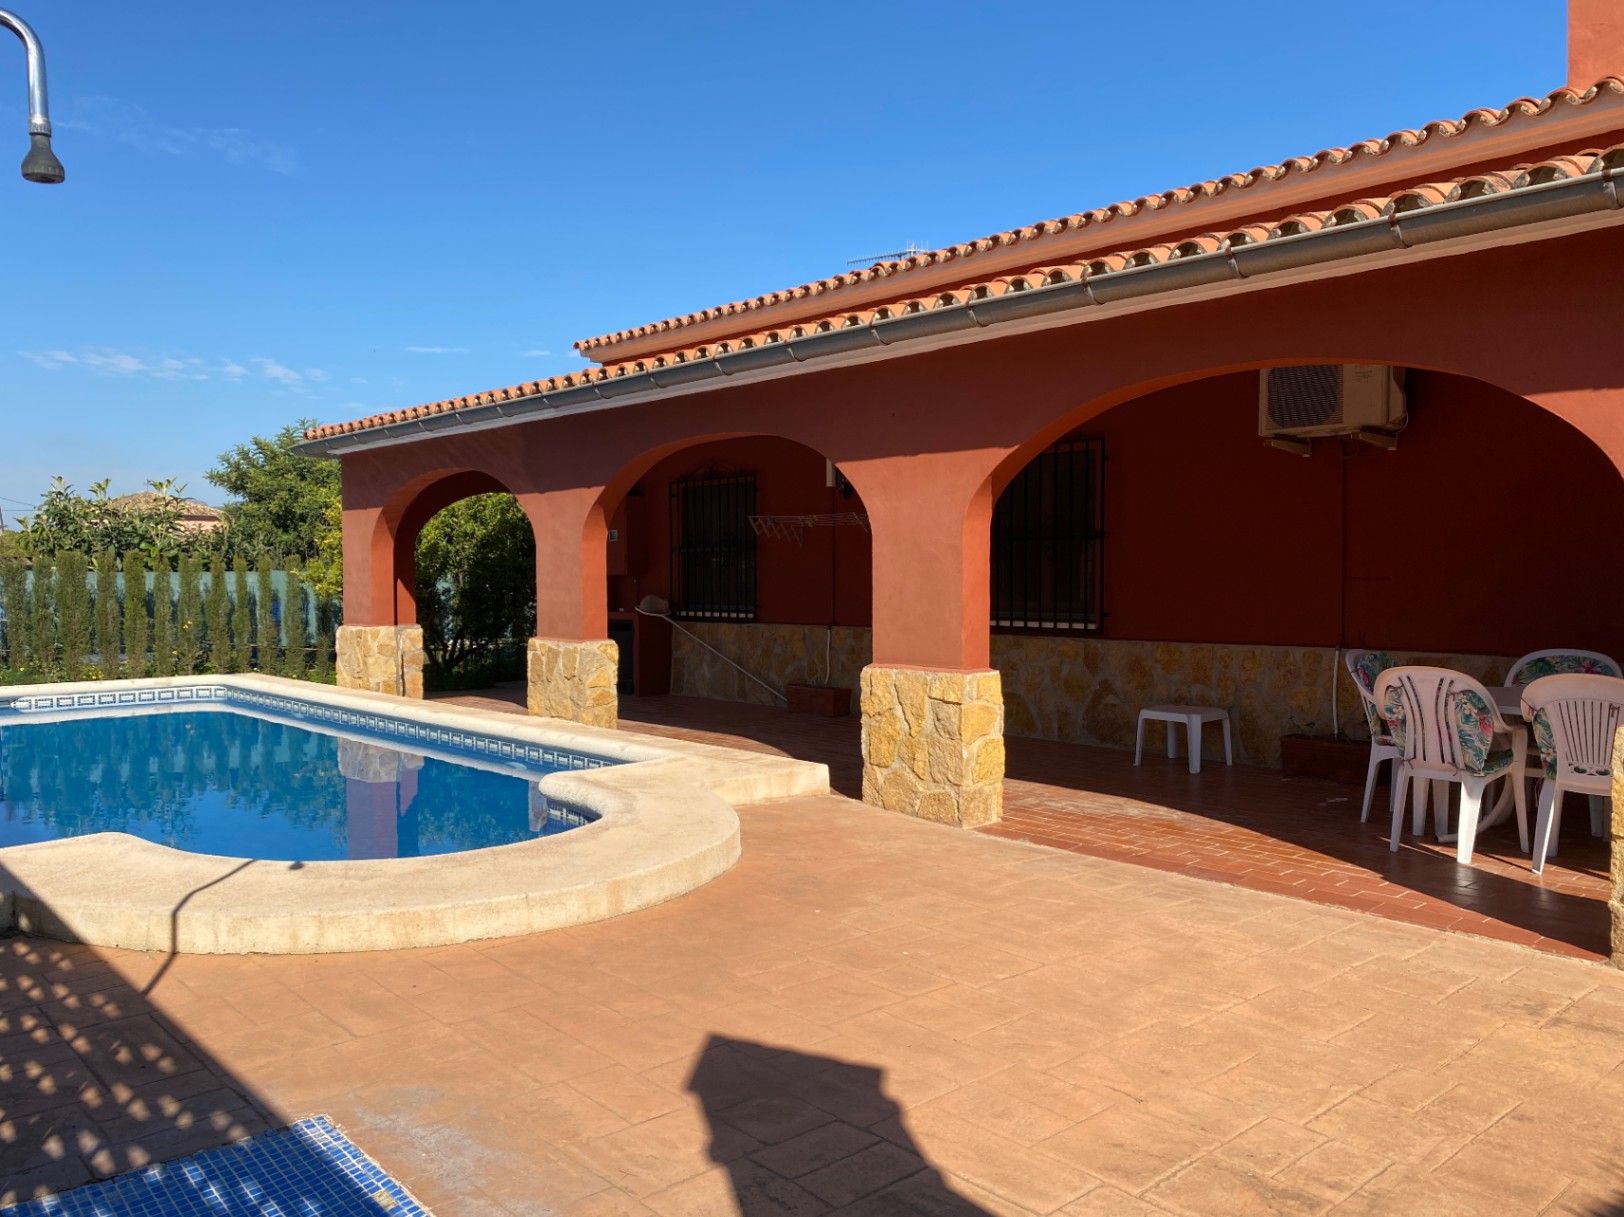 Beautiful Spanish style finca with pool, BB, garage, carport, A/C, close to town.